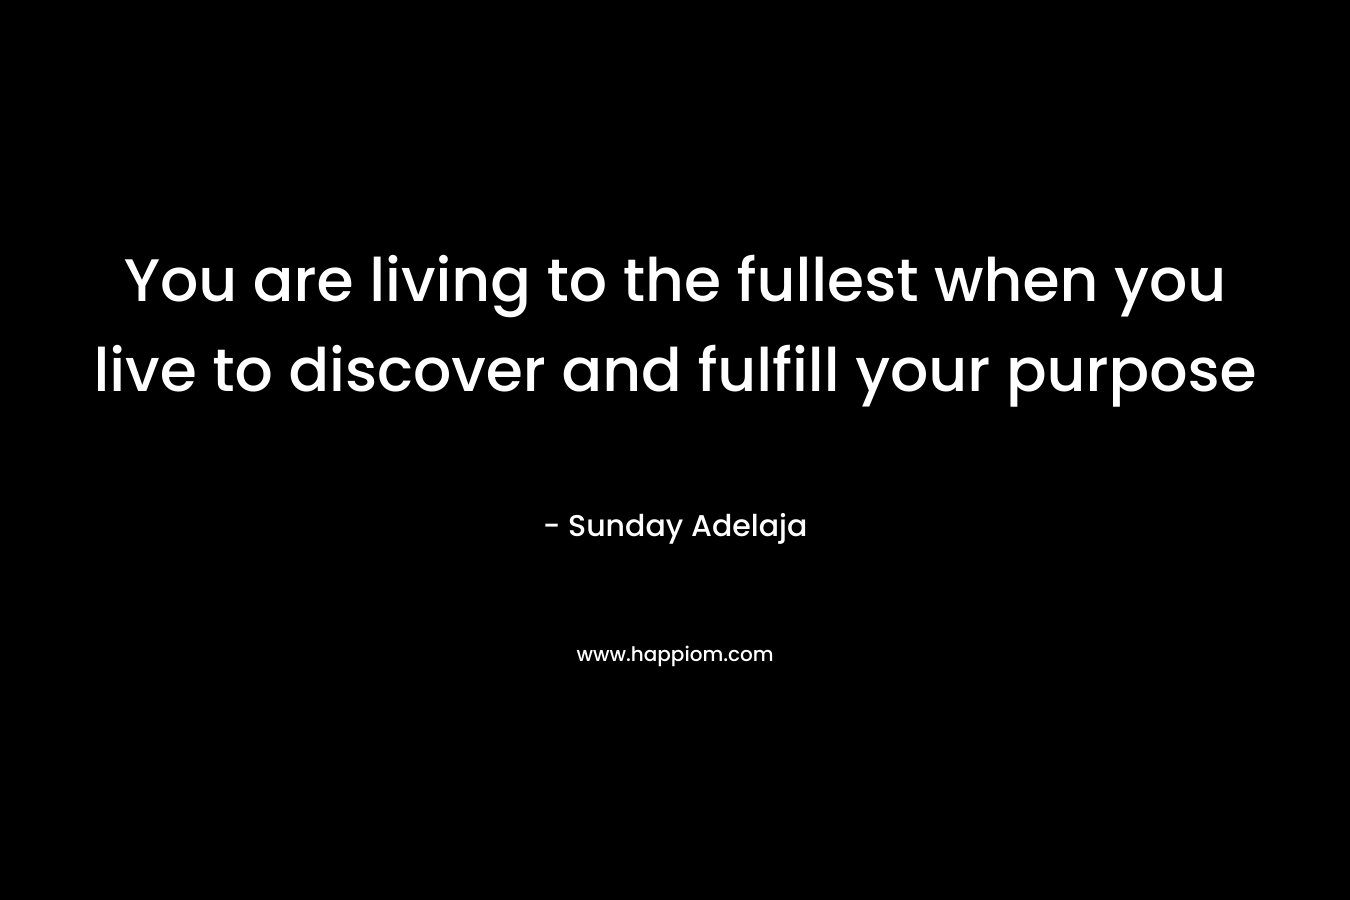 You are living to the fullest when you live to discover and fulfill your purpose